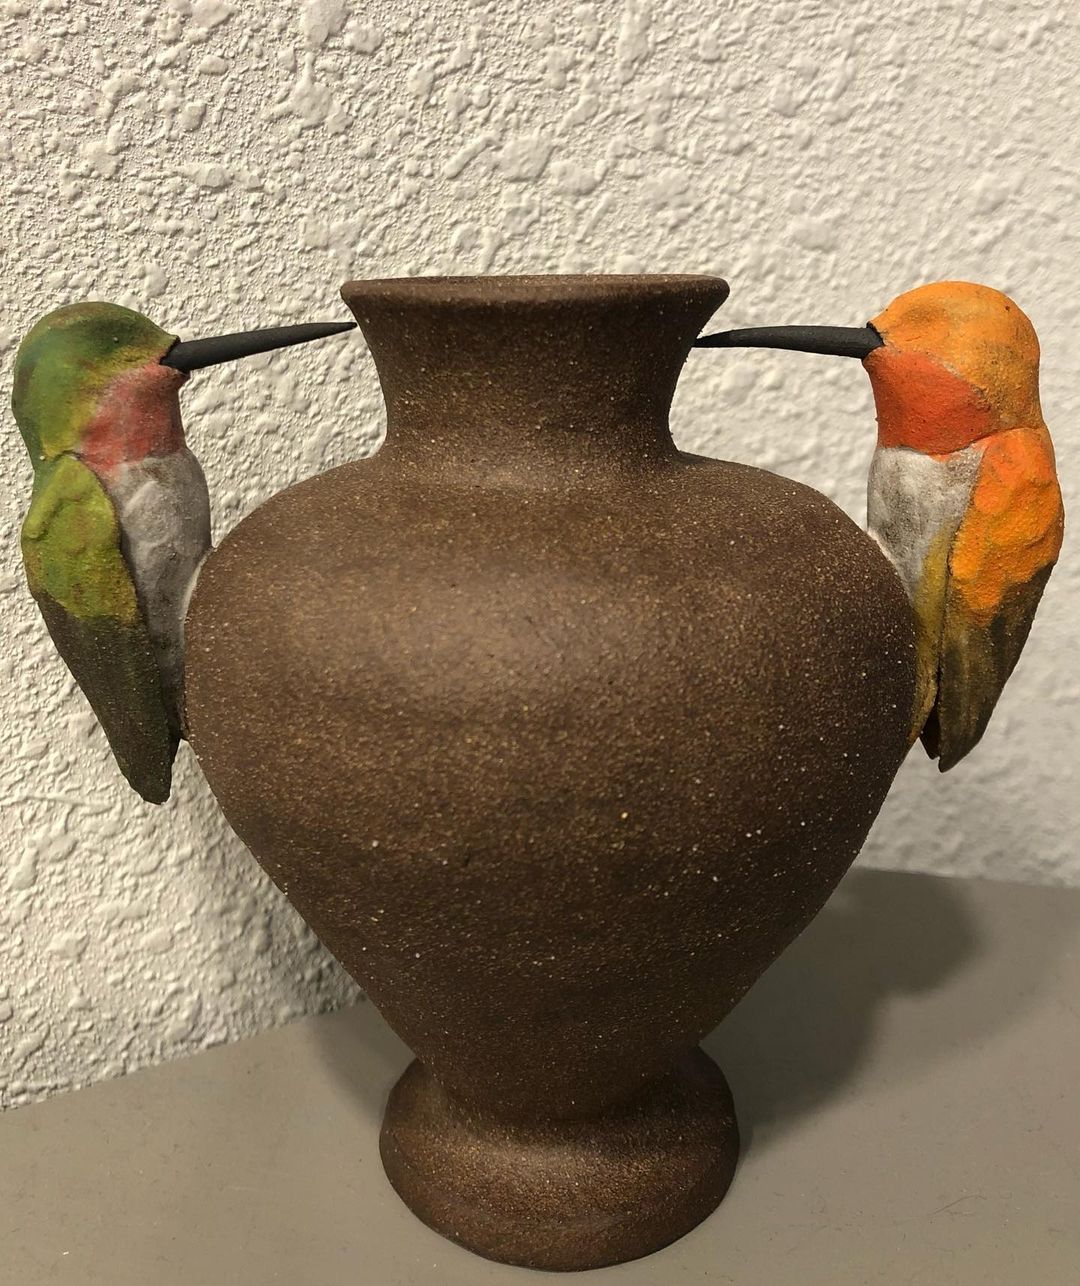 Ceramic Vases Ornate With Realistic Bird Sculptures By Sarah Conti (11)